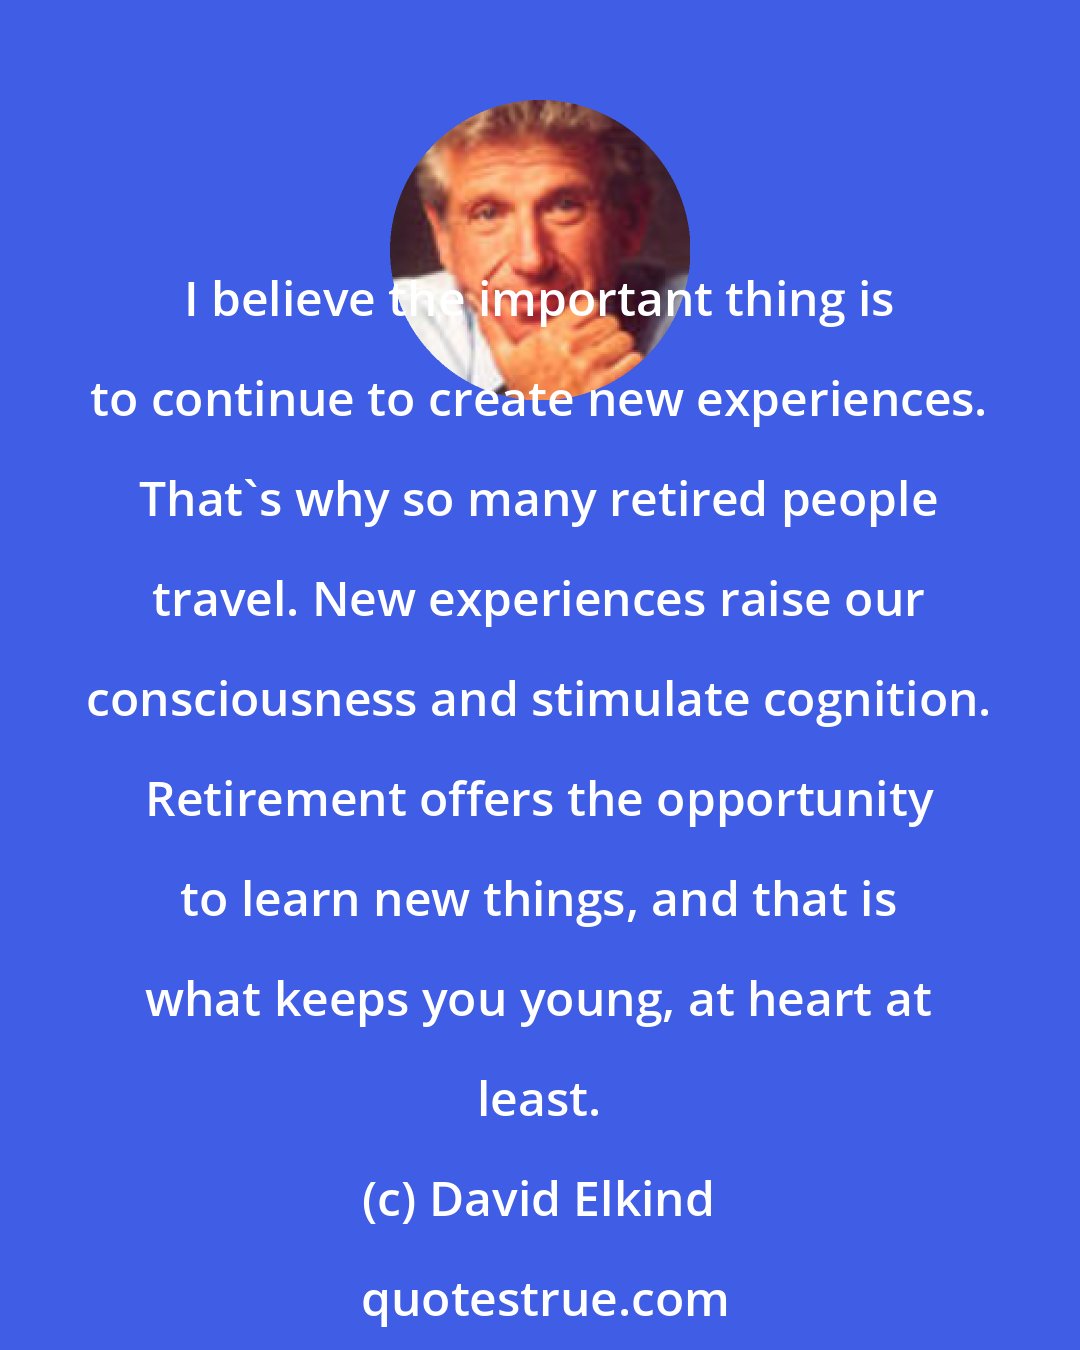 David Elkind: I believe the important thing is to continue to create new experiences. That's why so many retired people travel. New experiences raise our consciousness and stimulate cognition. Retirement offers the opportunity to learn new things, and that is what keeps you young, at heart at least.